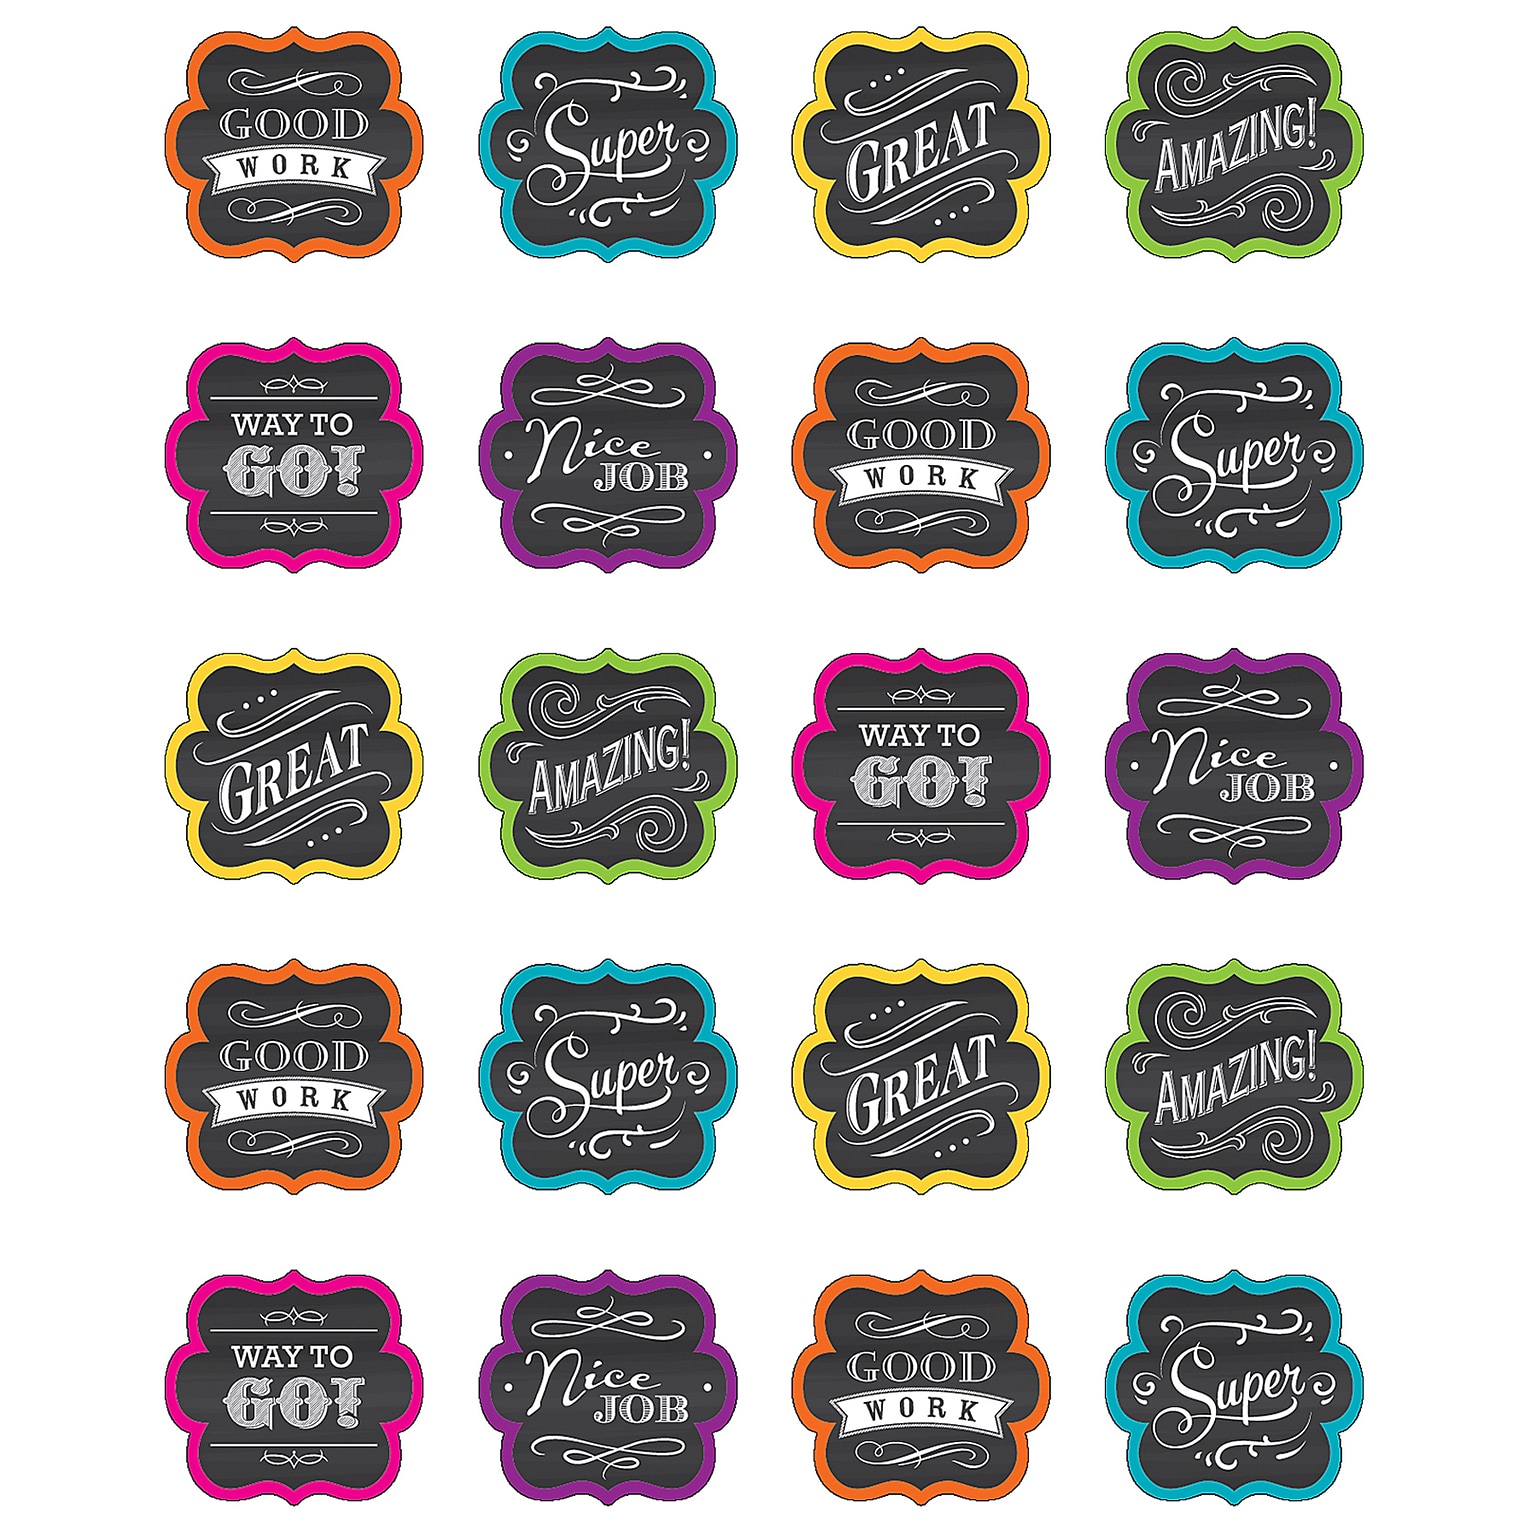 Teacher Created Resources Chalkboard Brights Stickers, Pack of 120 (TCR5618)